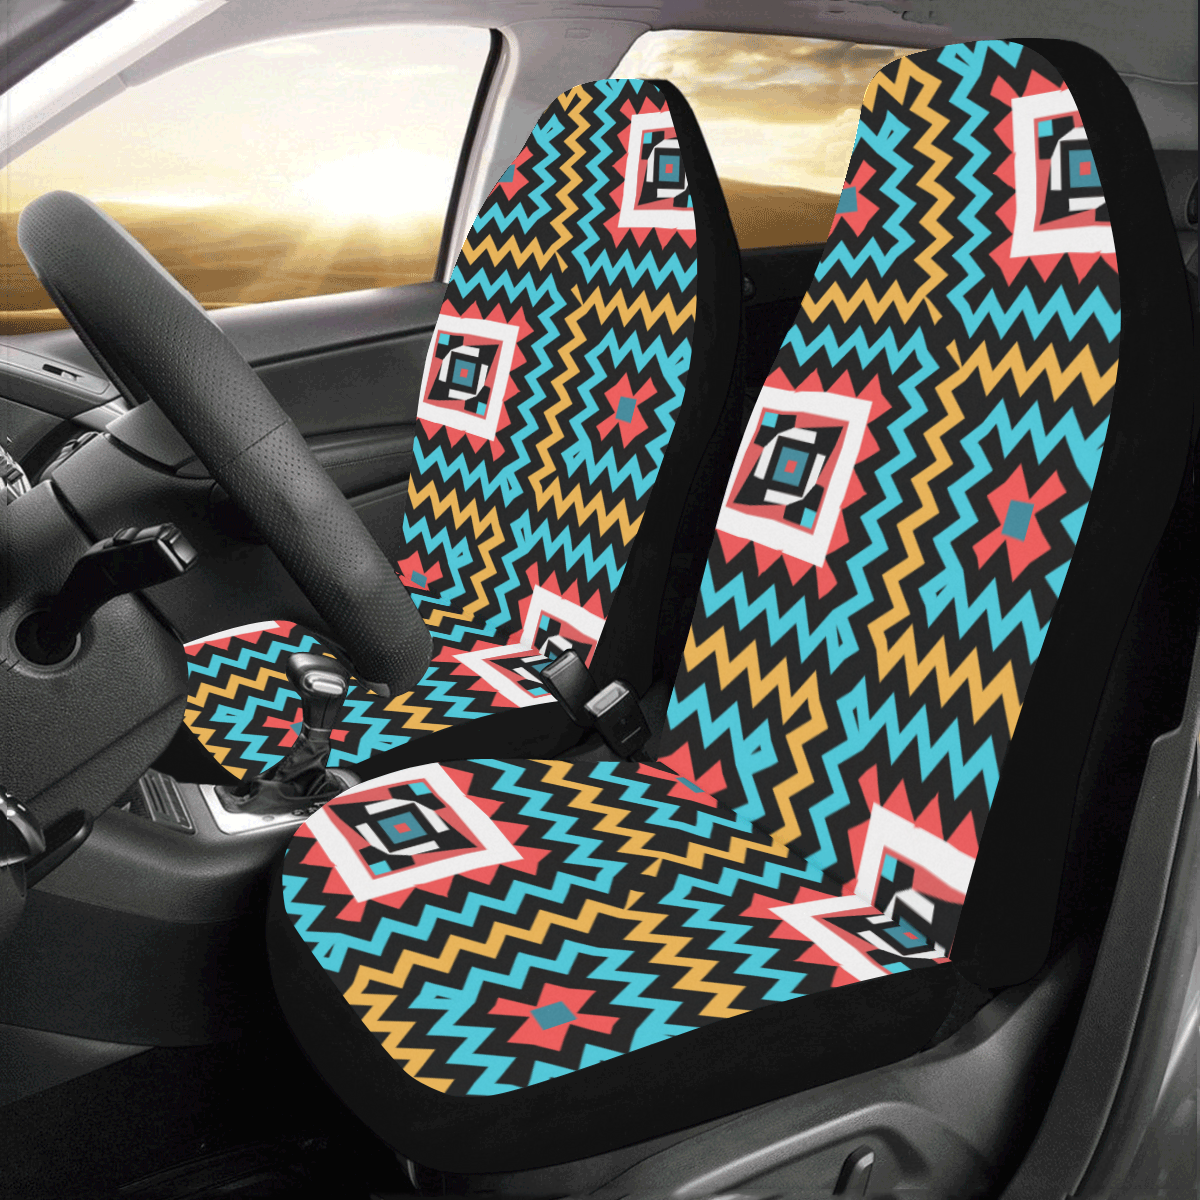 Shapes on a black background Car Seat Covers (Set of 2)